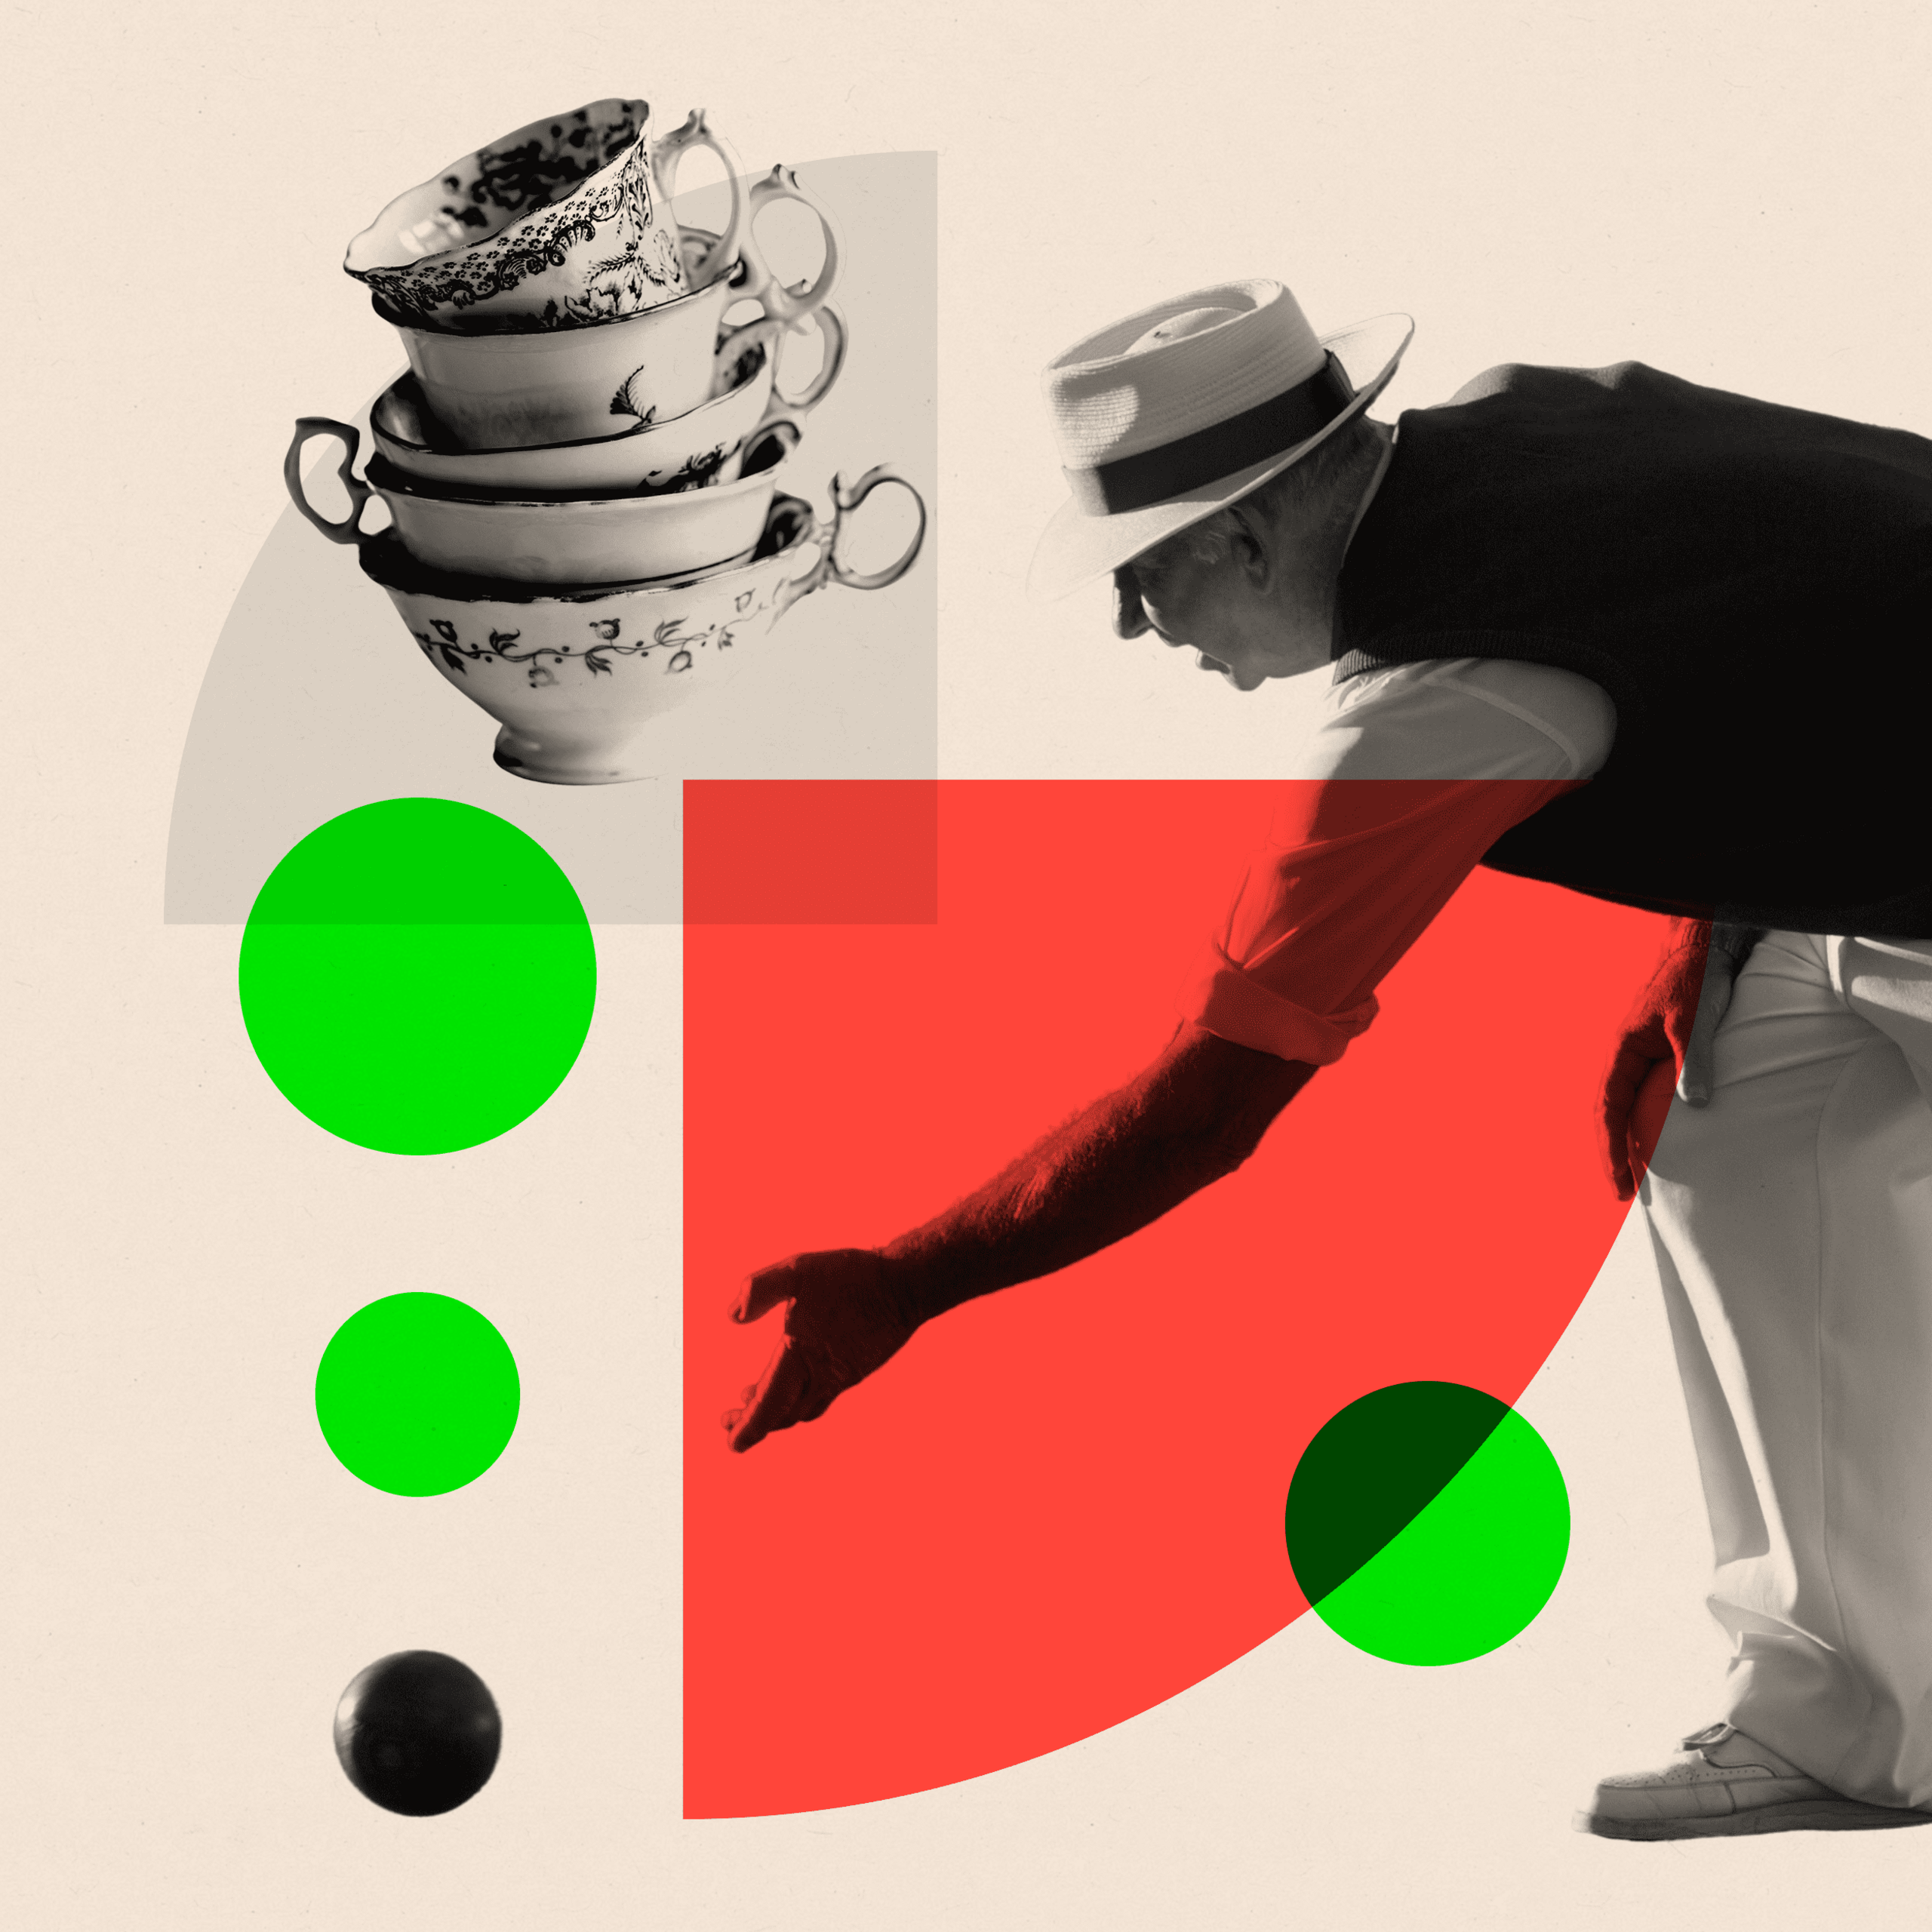 Montage showing a man playing bowls and stack ofteacups